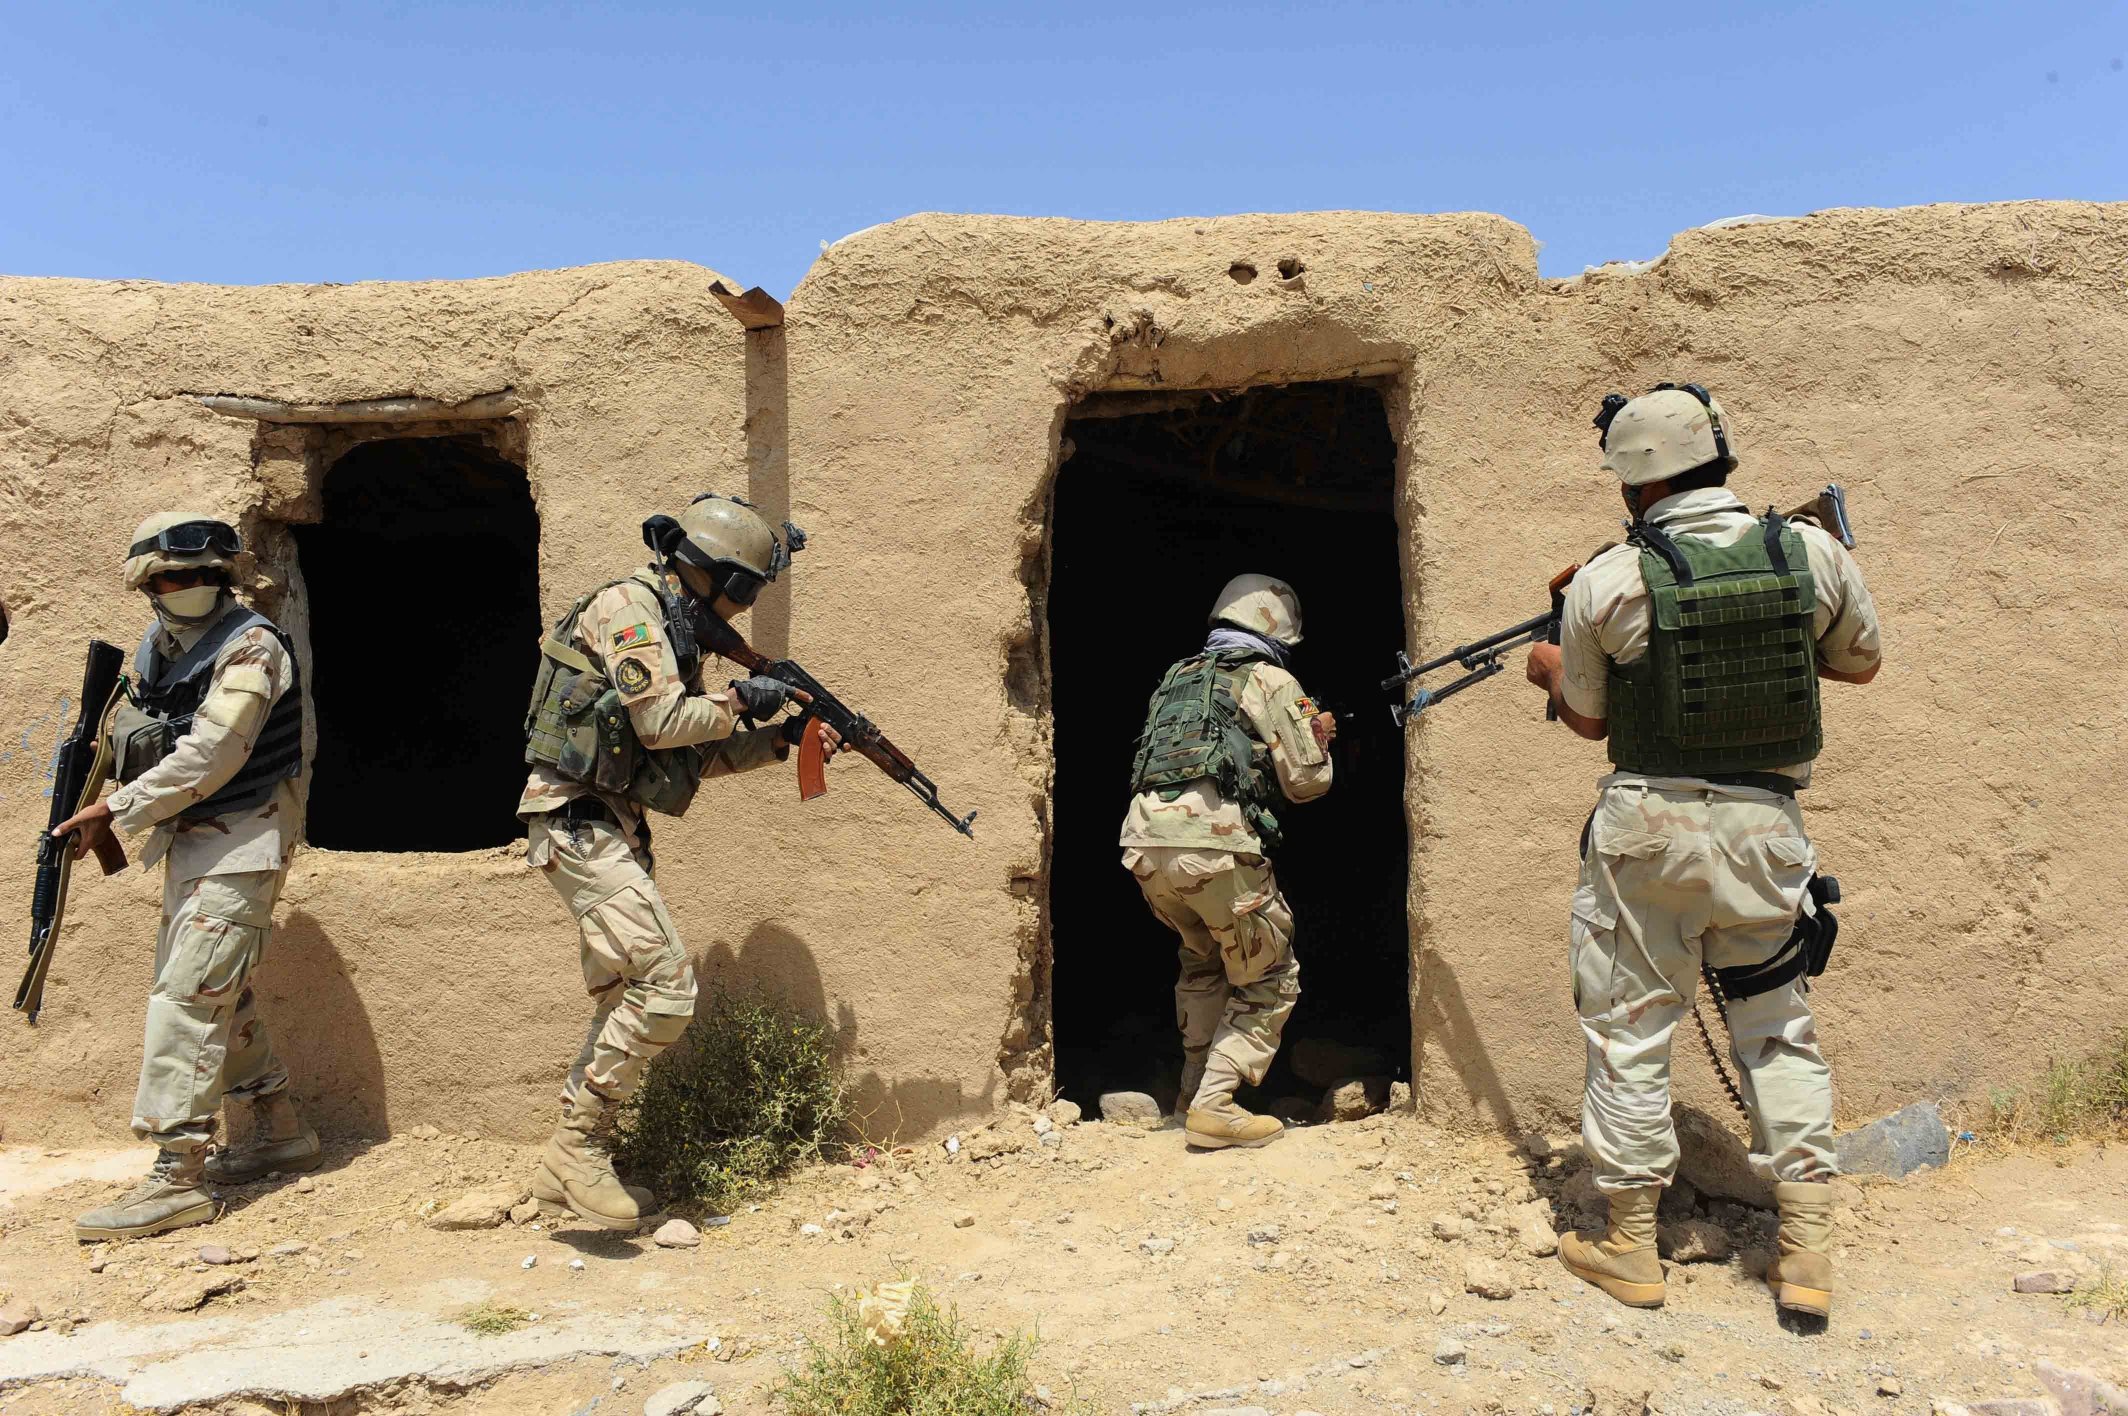 Afghan security forces search a building following an insurgent attack. Taliban insurgents killed 15 police on the main highway in western Afghanistan. Photo: AFP